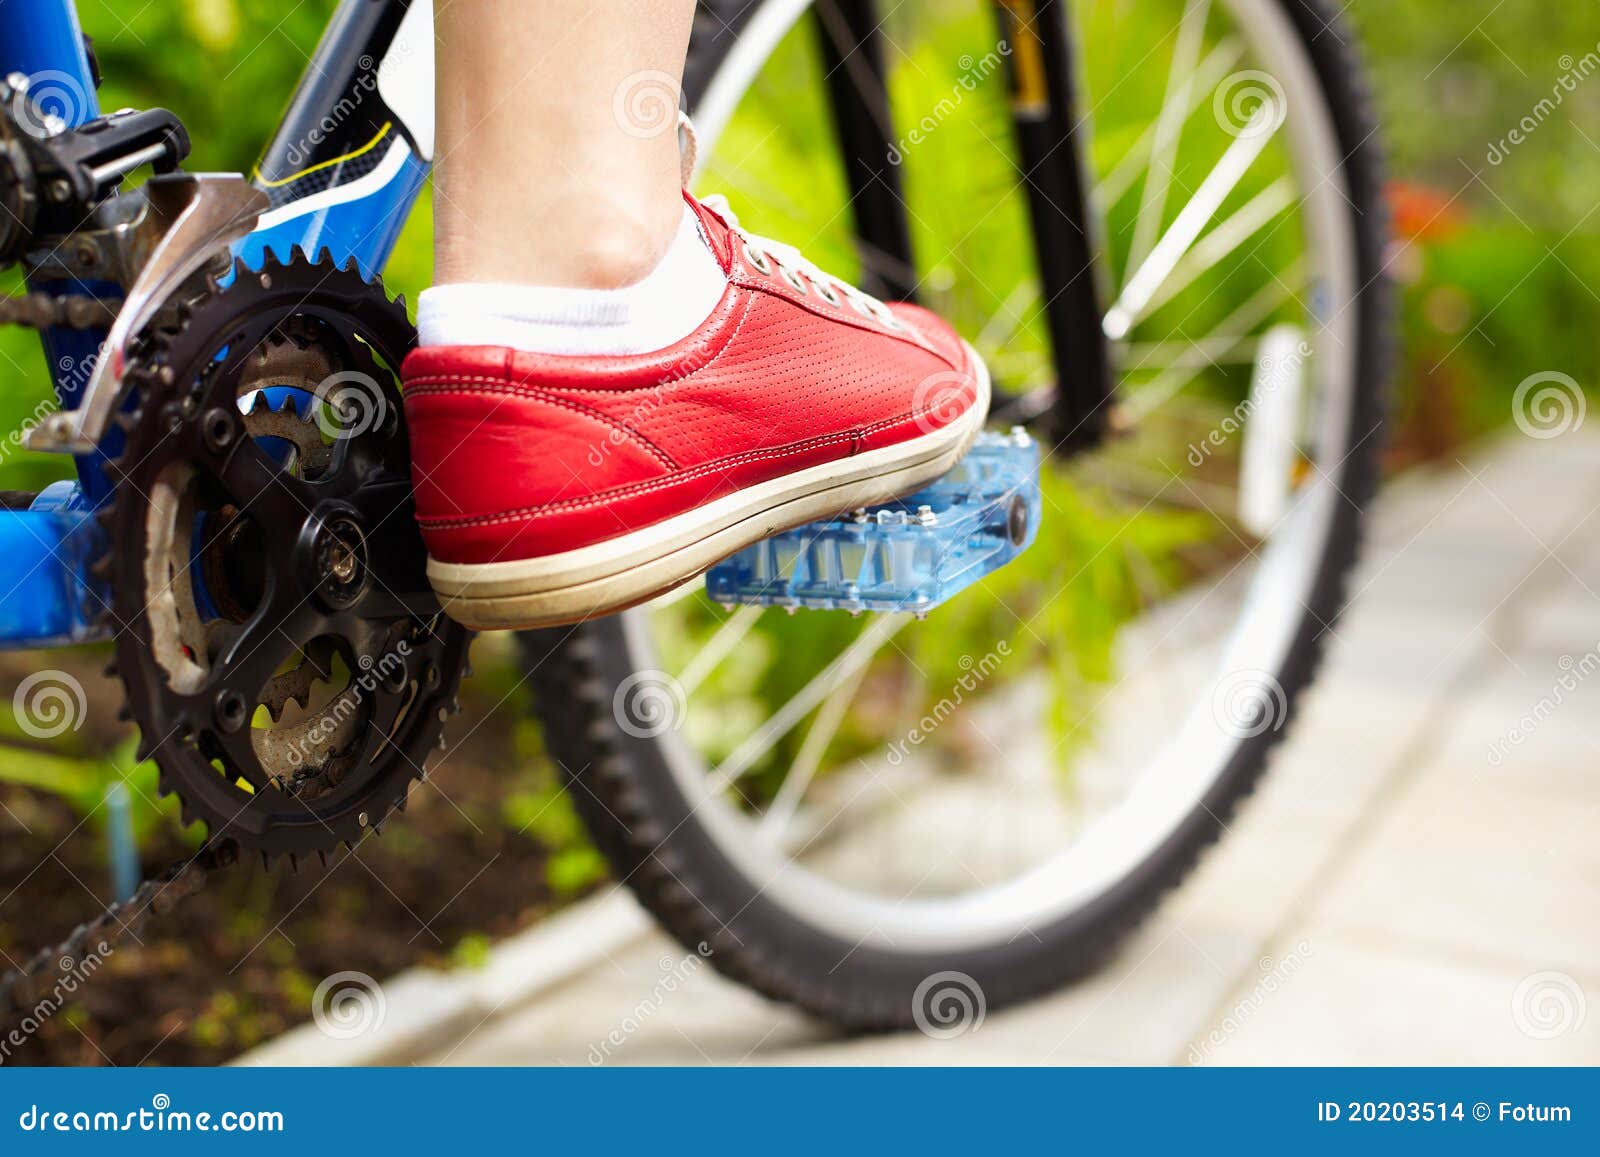 149 Bike Feet Foot Pedal Stock Photos - Free & Royalty-Free Stock Photos  from Dreamstime